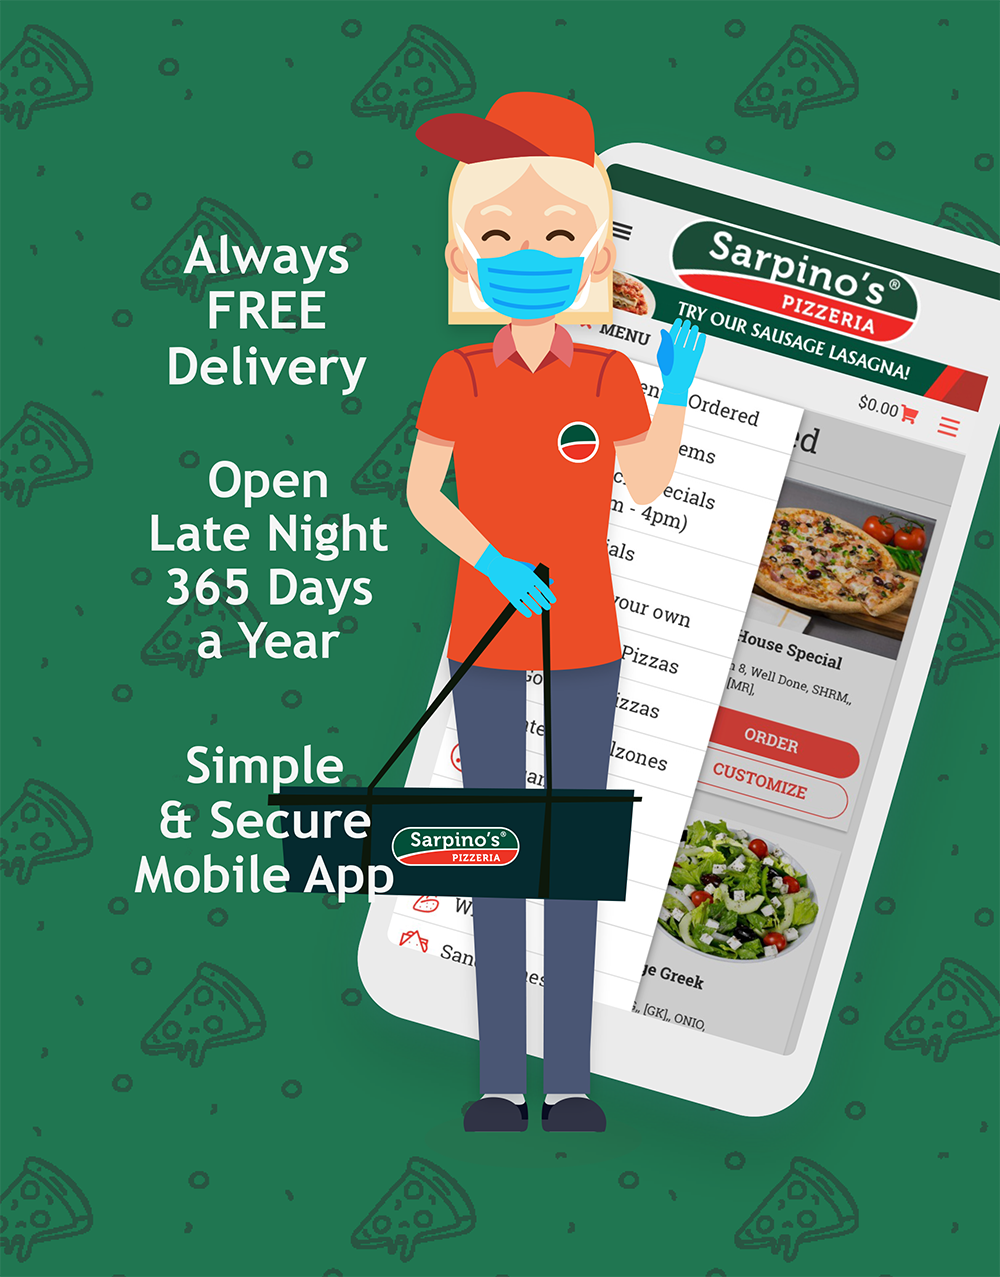 Sarpinos Pizza Leawood Coupons / Sarpino S Pizzeria North Leawood